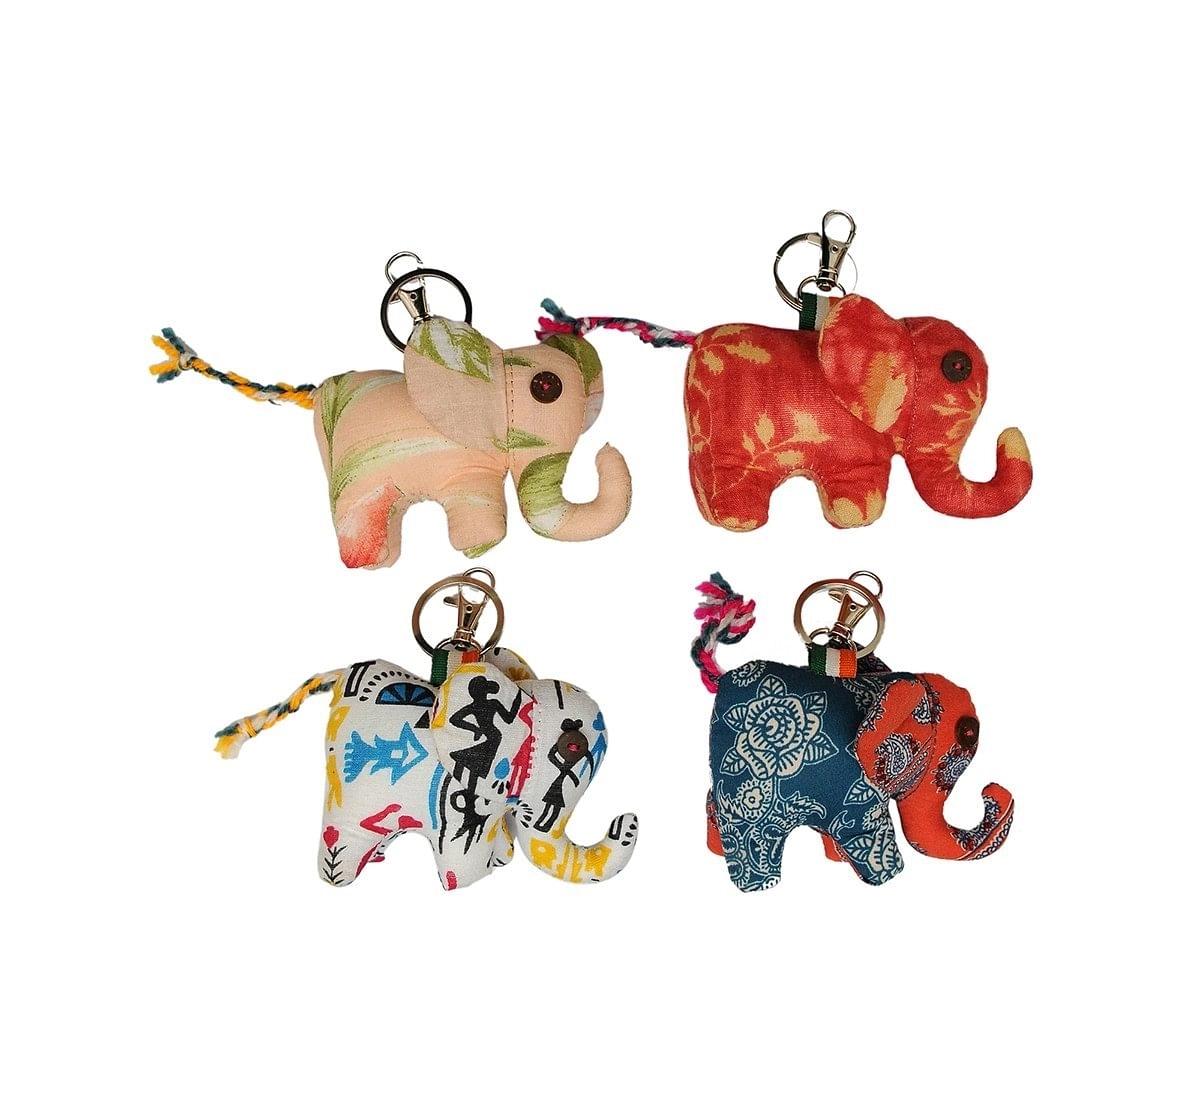 Vibrant India VI Elephant Soft Toy Keychain for Kids age 3Y+ 